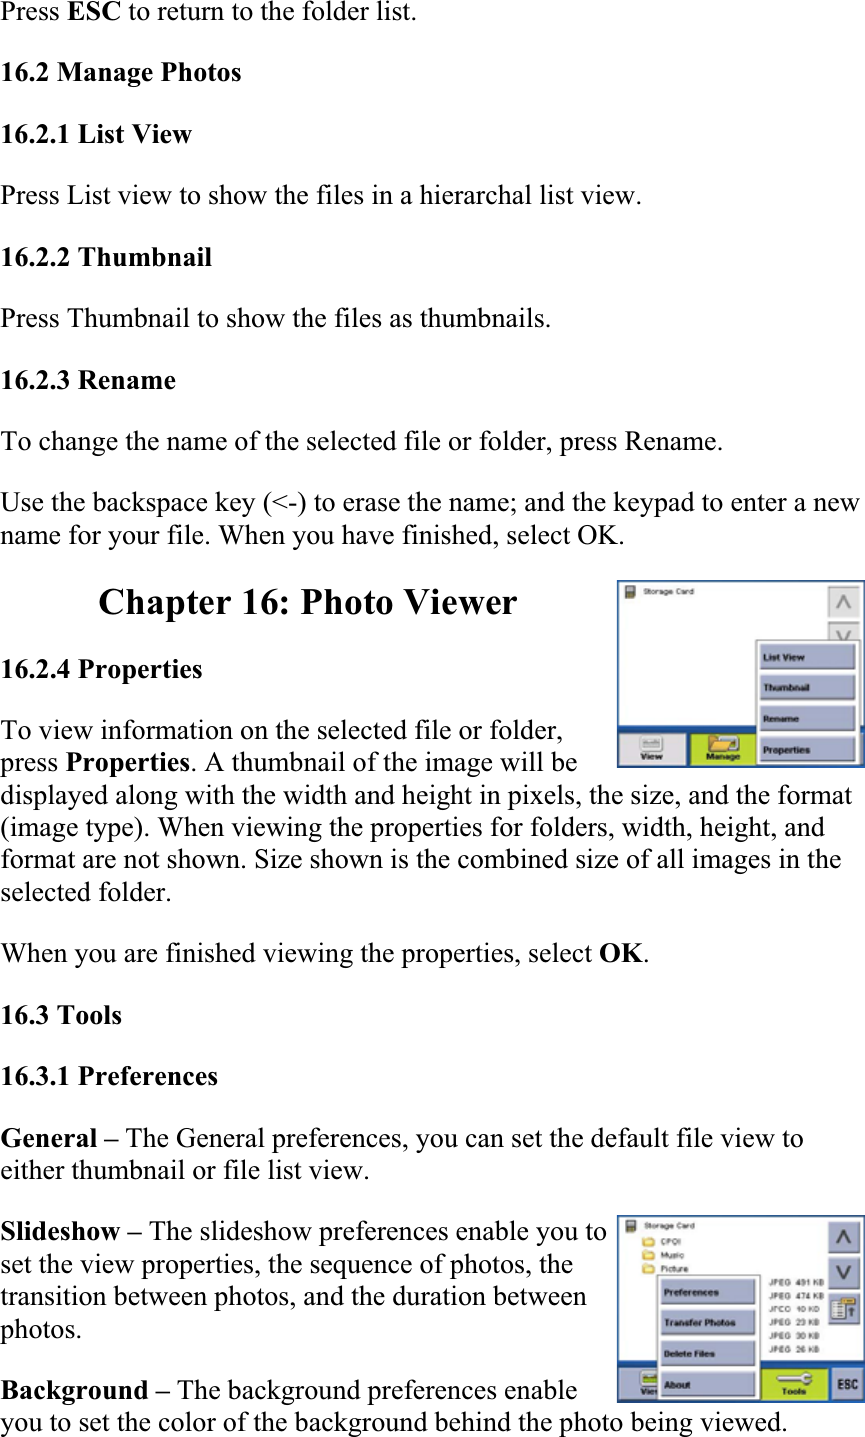 Press ESC to return to the folder list.  16.2 Manage Photos  16.2.1 List View  Press List view to show the files in a hierarchal list view.  16.2.2 Thumbnail  Press Thumbnail to show the files as thumbnails.  16.2.3 Rename  To change the name of the selected file or folder, press Rename.  Use the backspace key (&lt;-) to erase the name; and the keypad to enter a new name for your file. When you have finished, select OK.  Chapter 16: Photo Viewer 16.2.4 Properties  To view information on the selected file or folder, press Properties. A thumbnail of the image will be displayed along with the width and height in pixels, the size, and the format (image type). When viewing the properties for folders, width, height, and format are not shown. Size shown is the combined size of all images in the selected folder.  When you are finished viewing the properties, select OK.16.3 Tools16.3.1 Preferences  General – The General preferences, you can set the default file view to either thumbnail or file list view.  Slideshow – The slideshow preferences enable you to set the view properties, the sequence of photos, the transition between photos, and the duration between photos.Background – The background preferences enable you to set the color of the background behind the photo being viewed.  